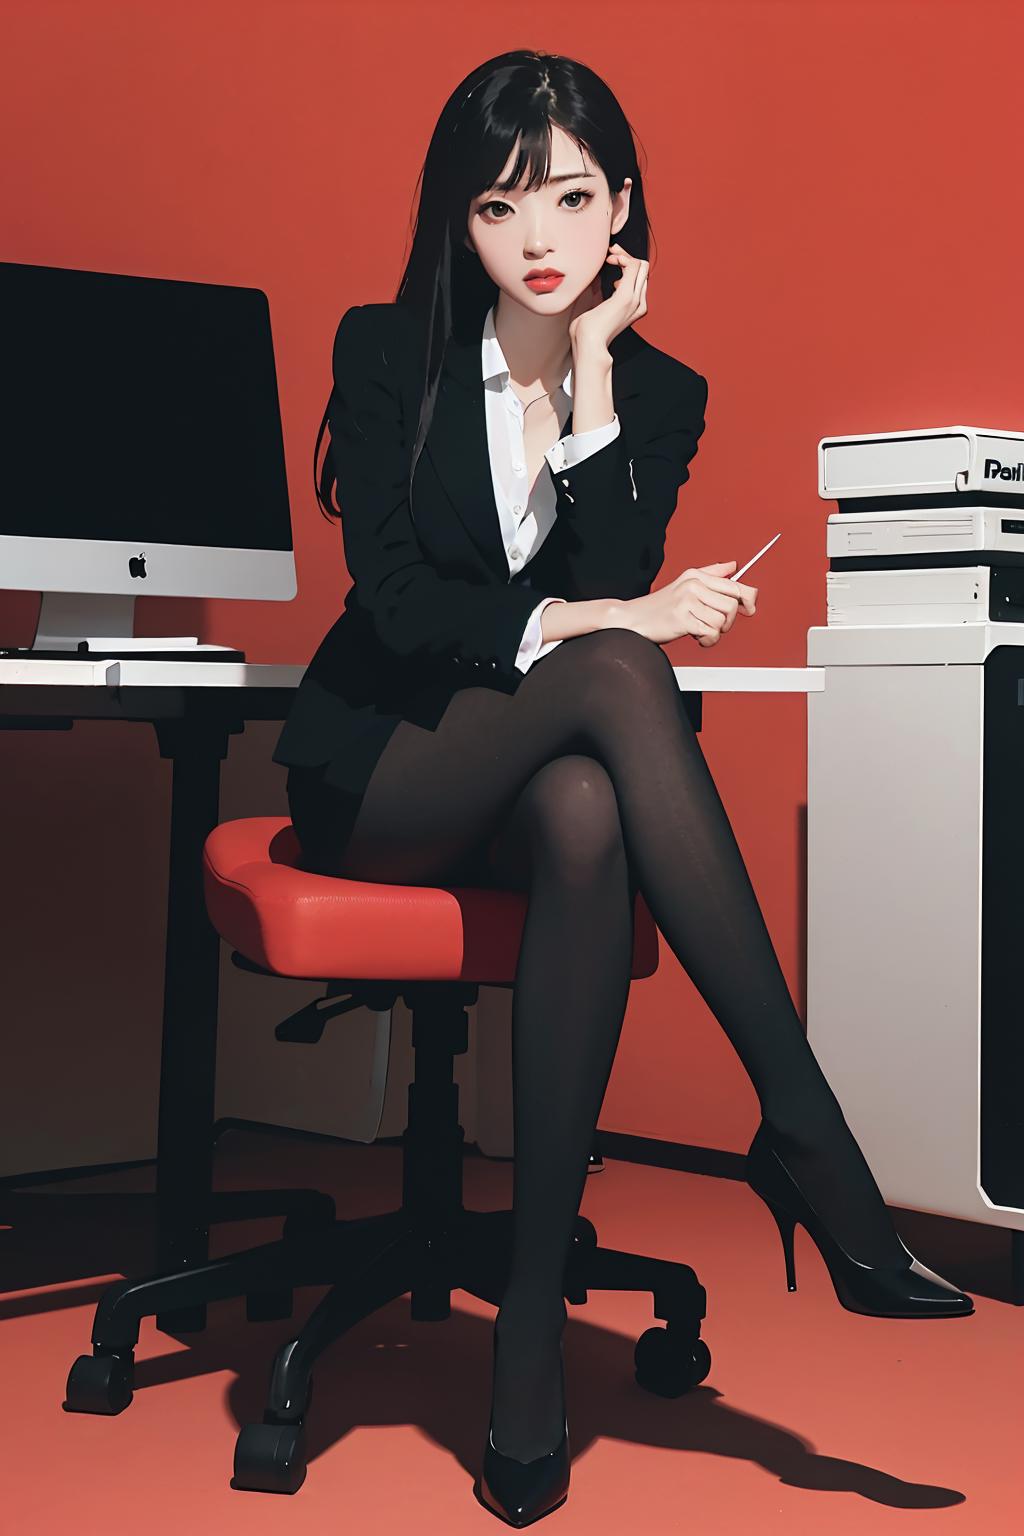 A beautifully dressed career woman sitting at a desk.